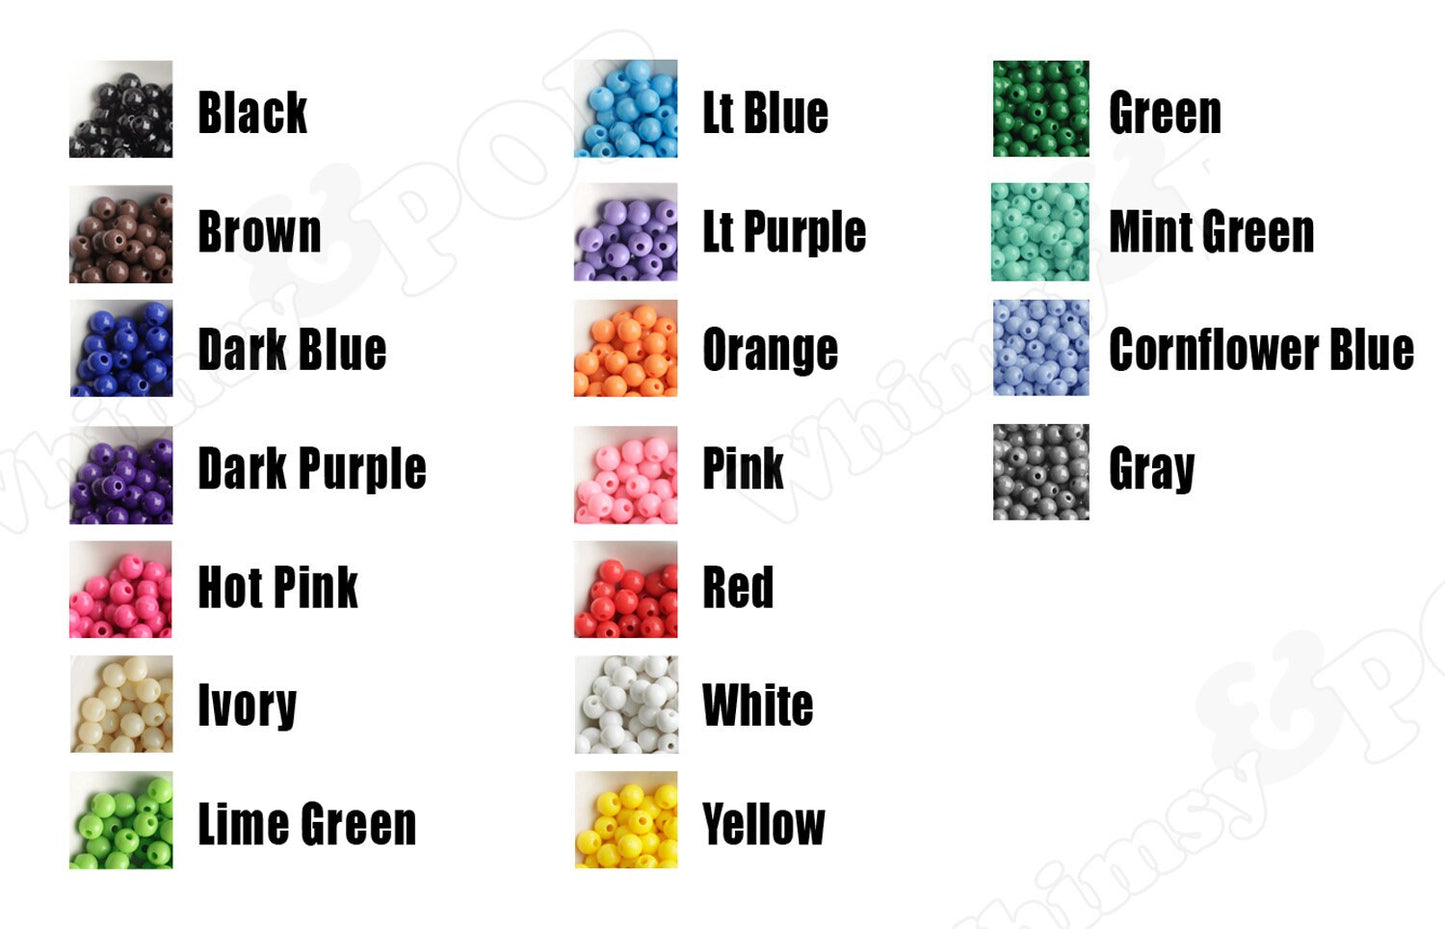 6mm Colorful Spacer Beads, Mini Gumball Beads